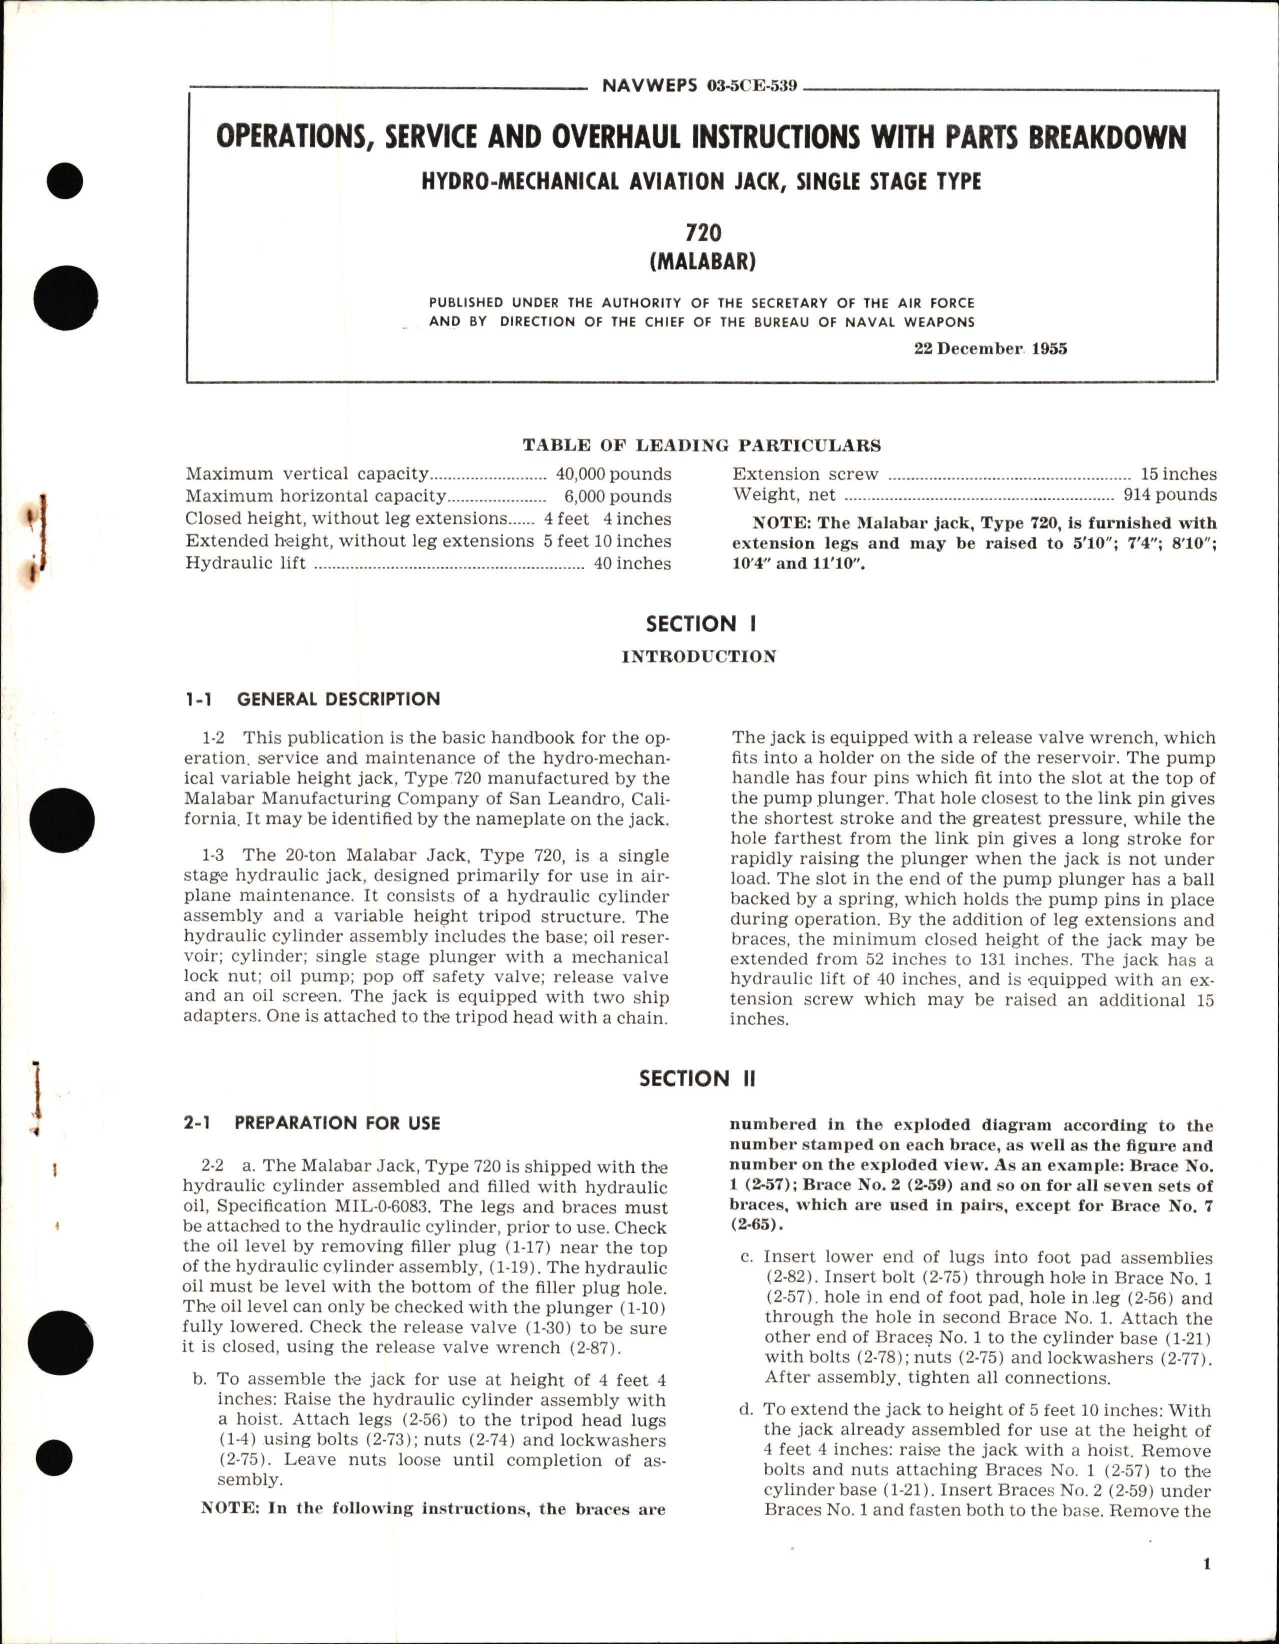 Sample page 1 from AirCorps Library document: Operations, Service and Overhaul Instructions with Parts Breakdown for Hydro Mechanical Aviation Jack, Single Stage Type 720